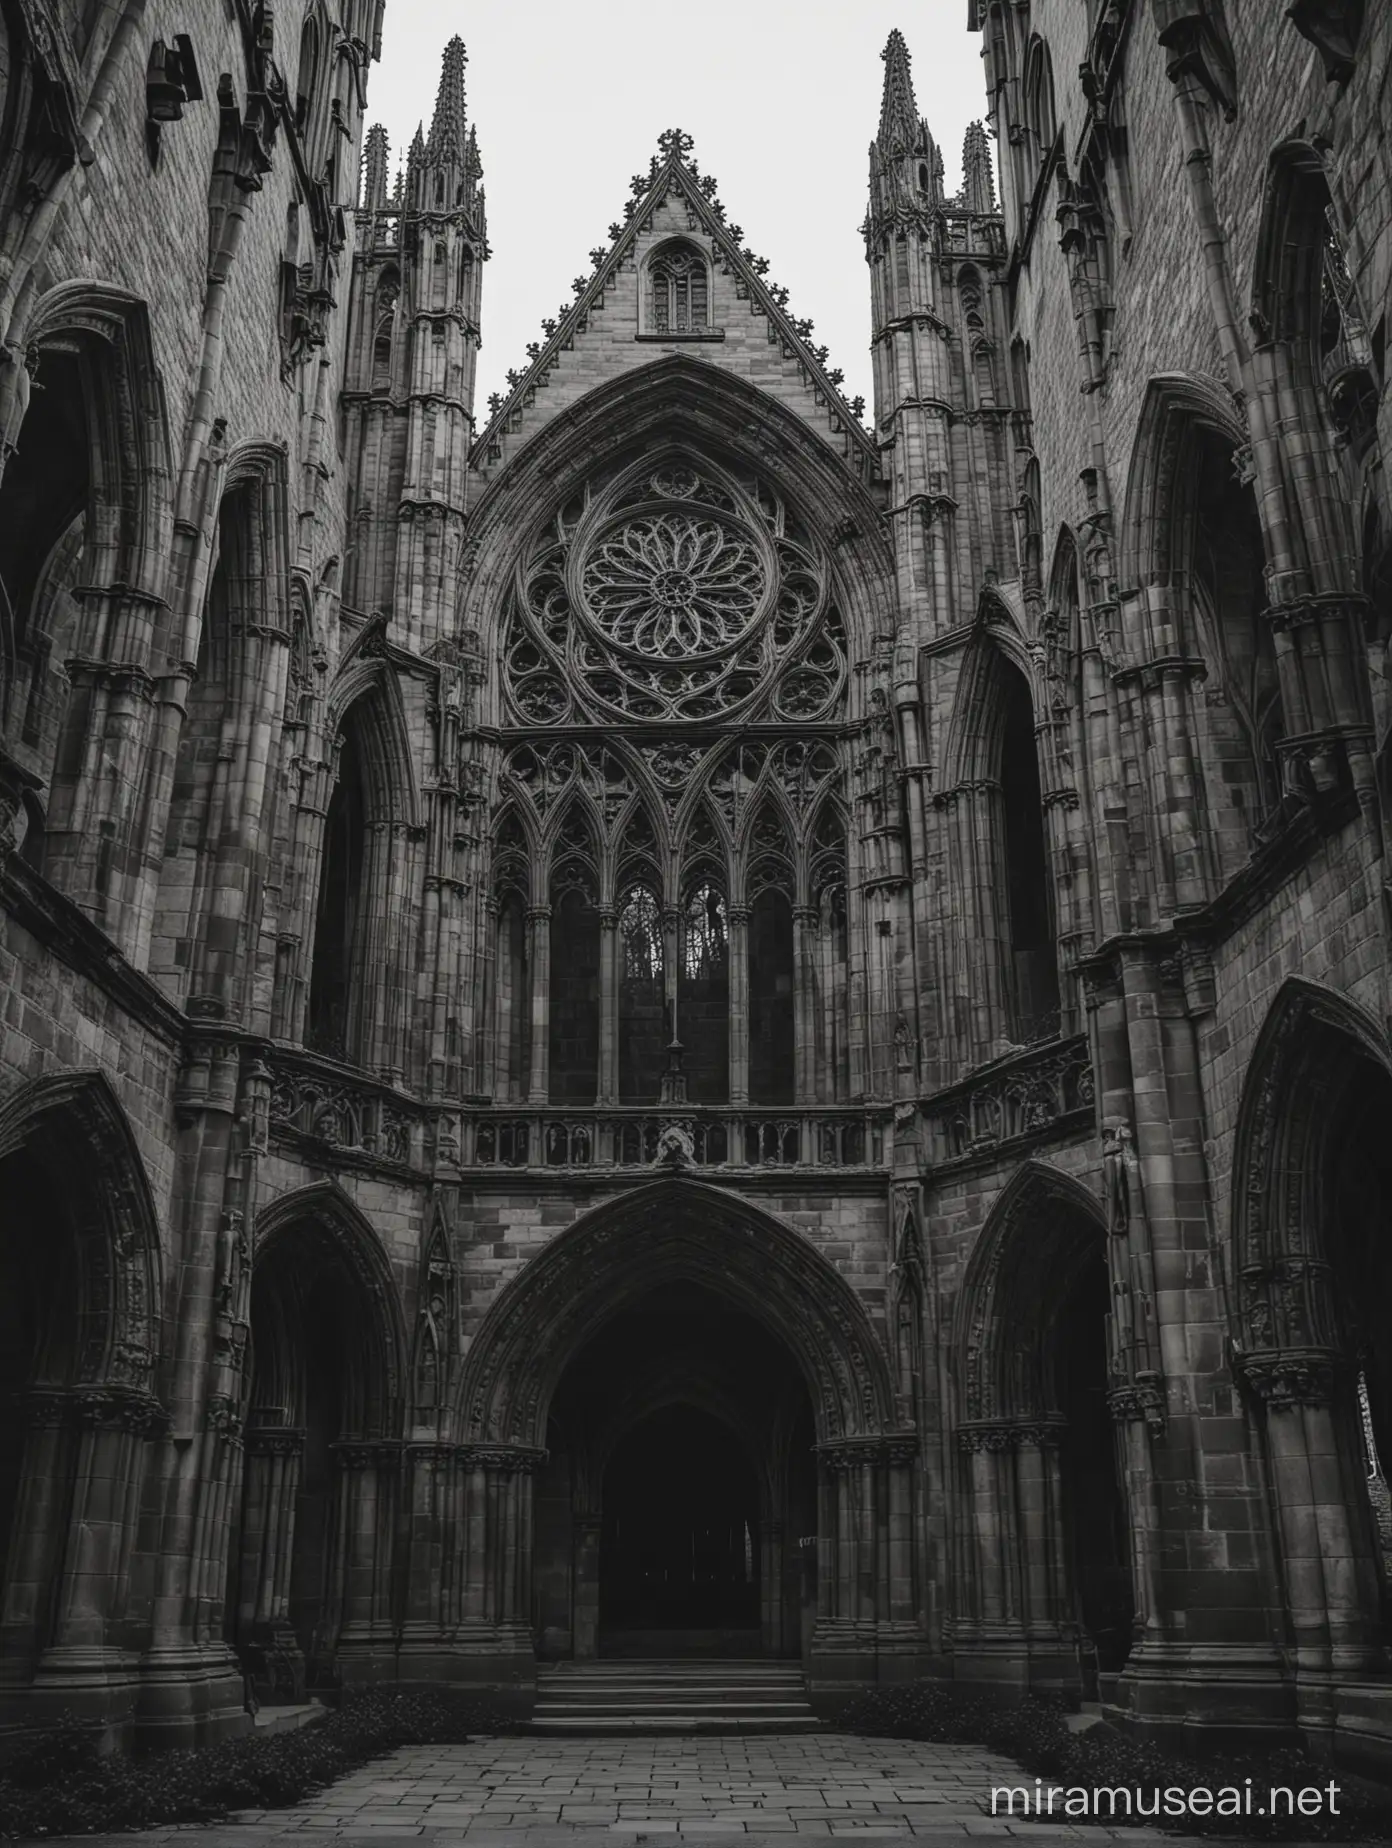 Gothic Architecture Majestic Cathedral with Intricate Stonework and Stained Glass Windows